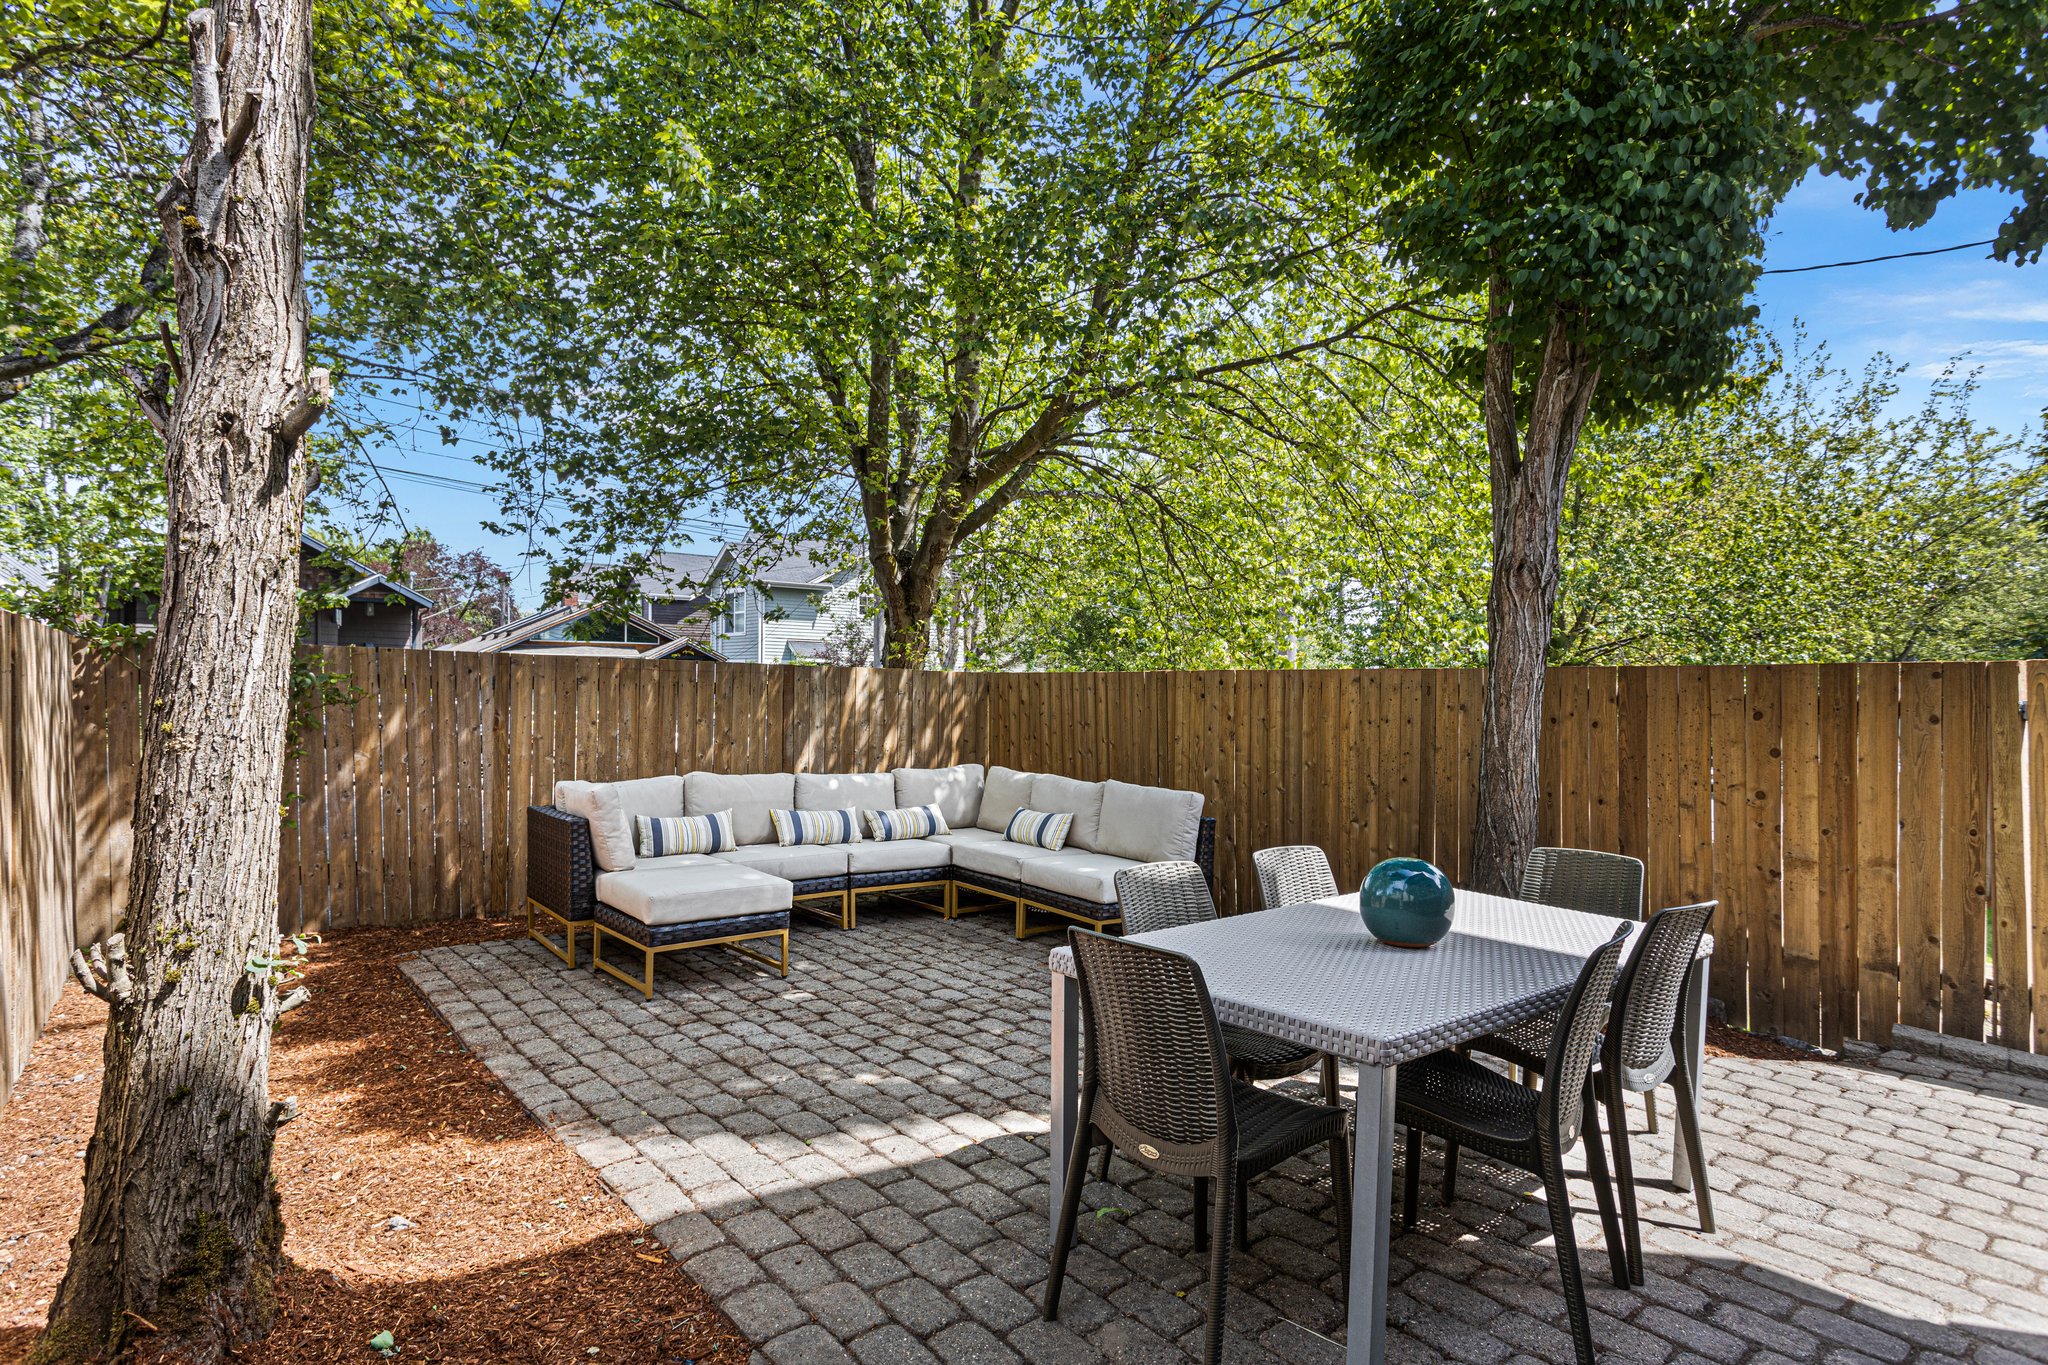 Step outside to your private retreat: a fenced outdoor patio, perfect for sipping your morning coffee, reading, or throwing a festive barbecue party.